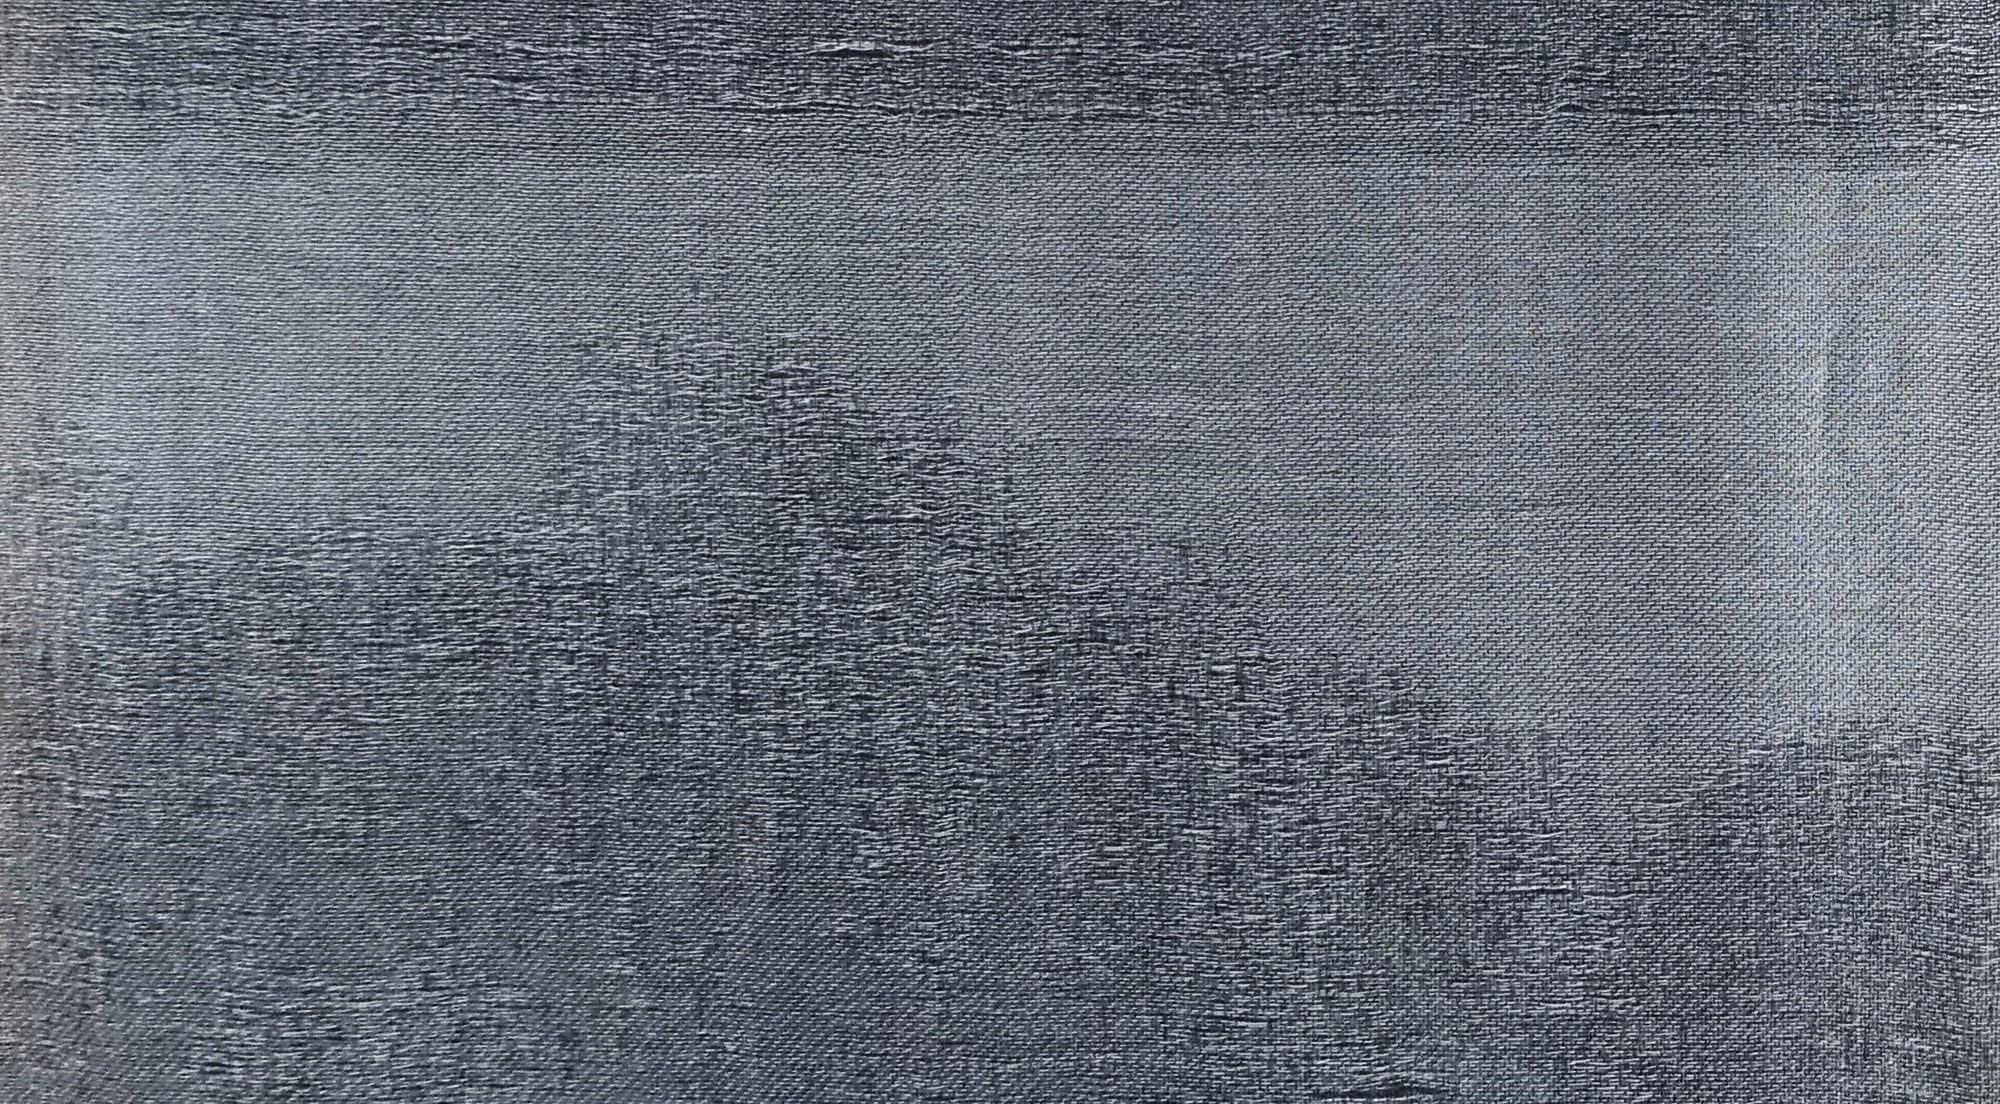 grey textile layers in close up, looking blurry and sharp at the same time, somehow